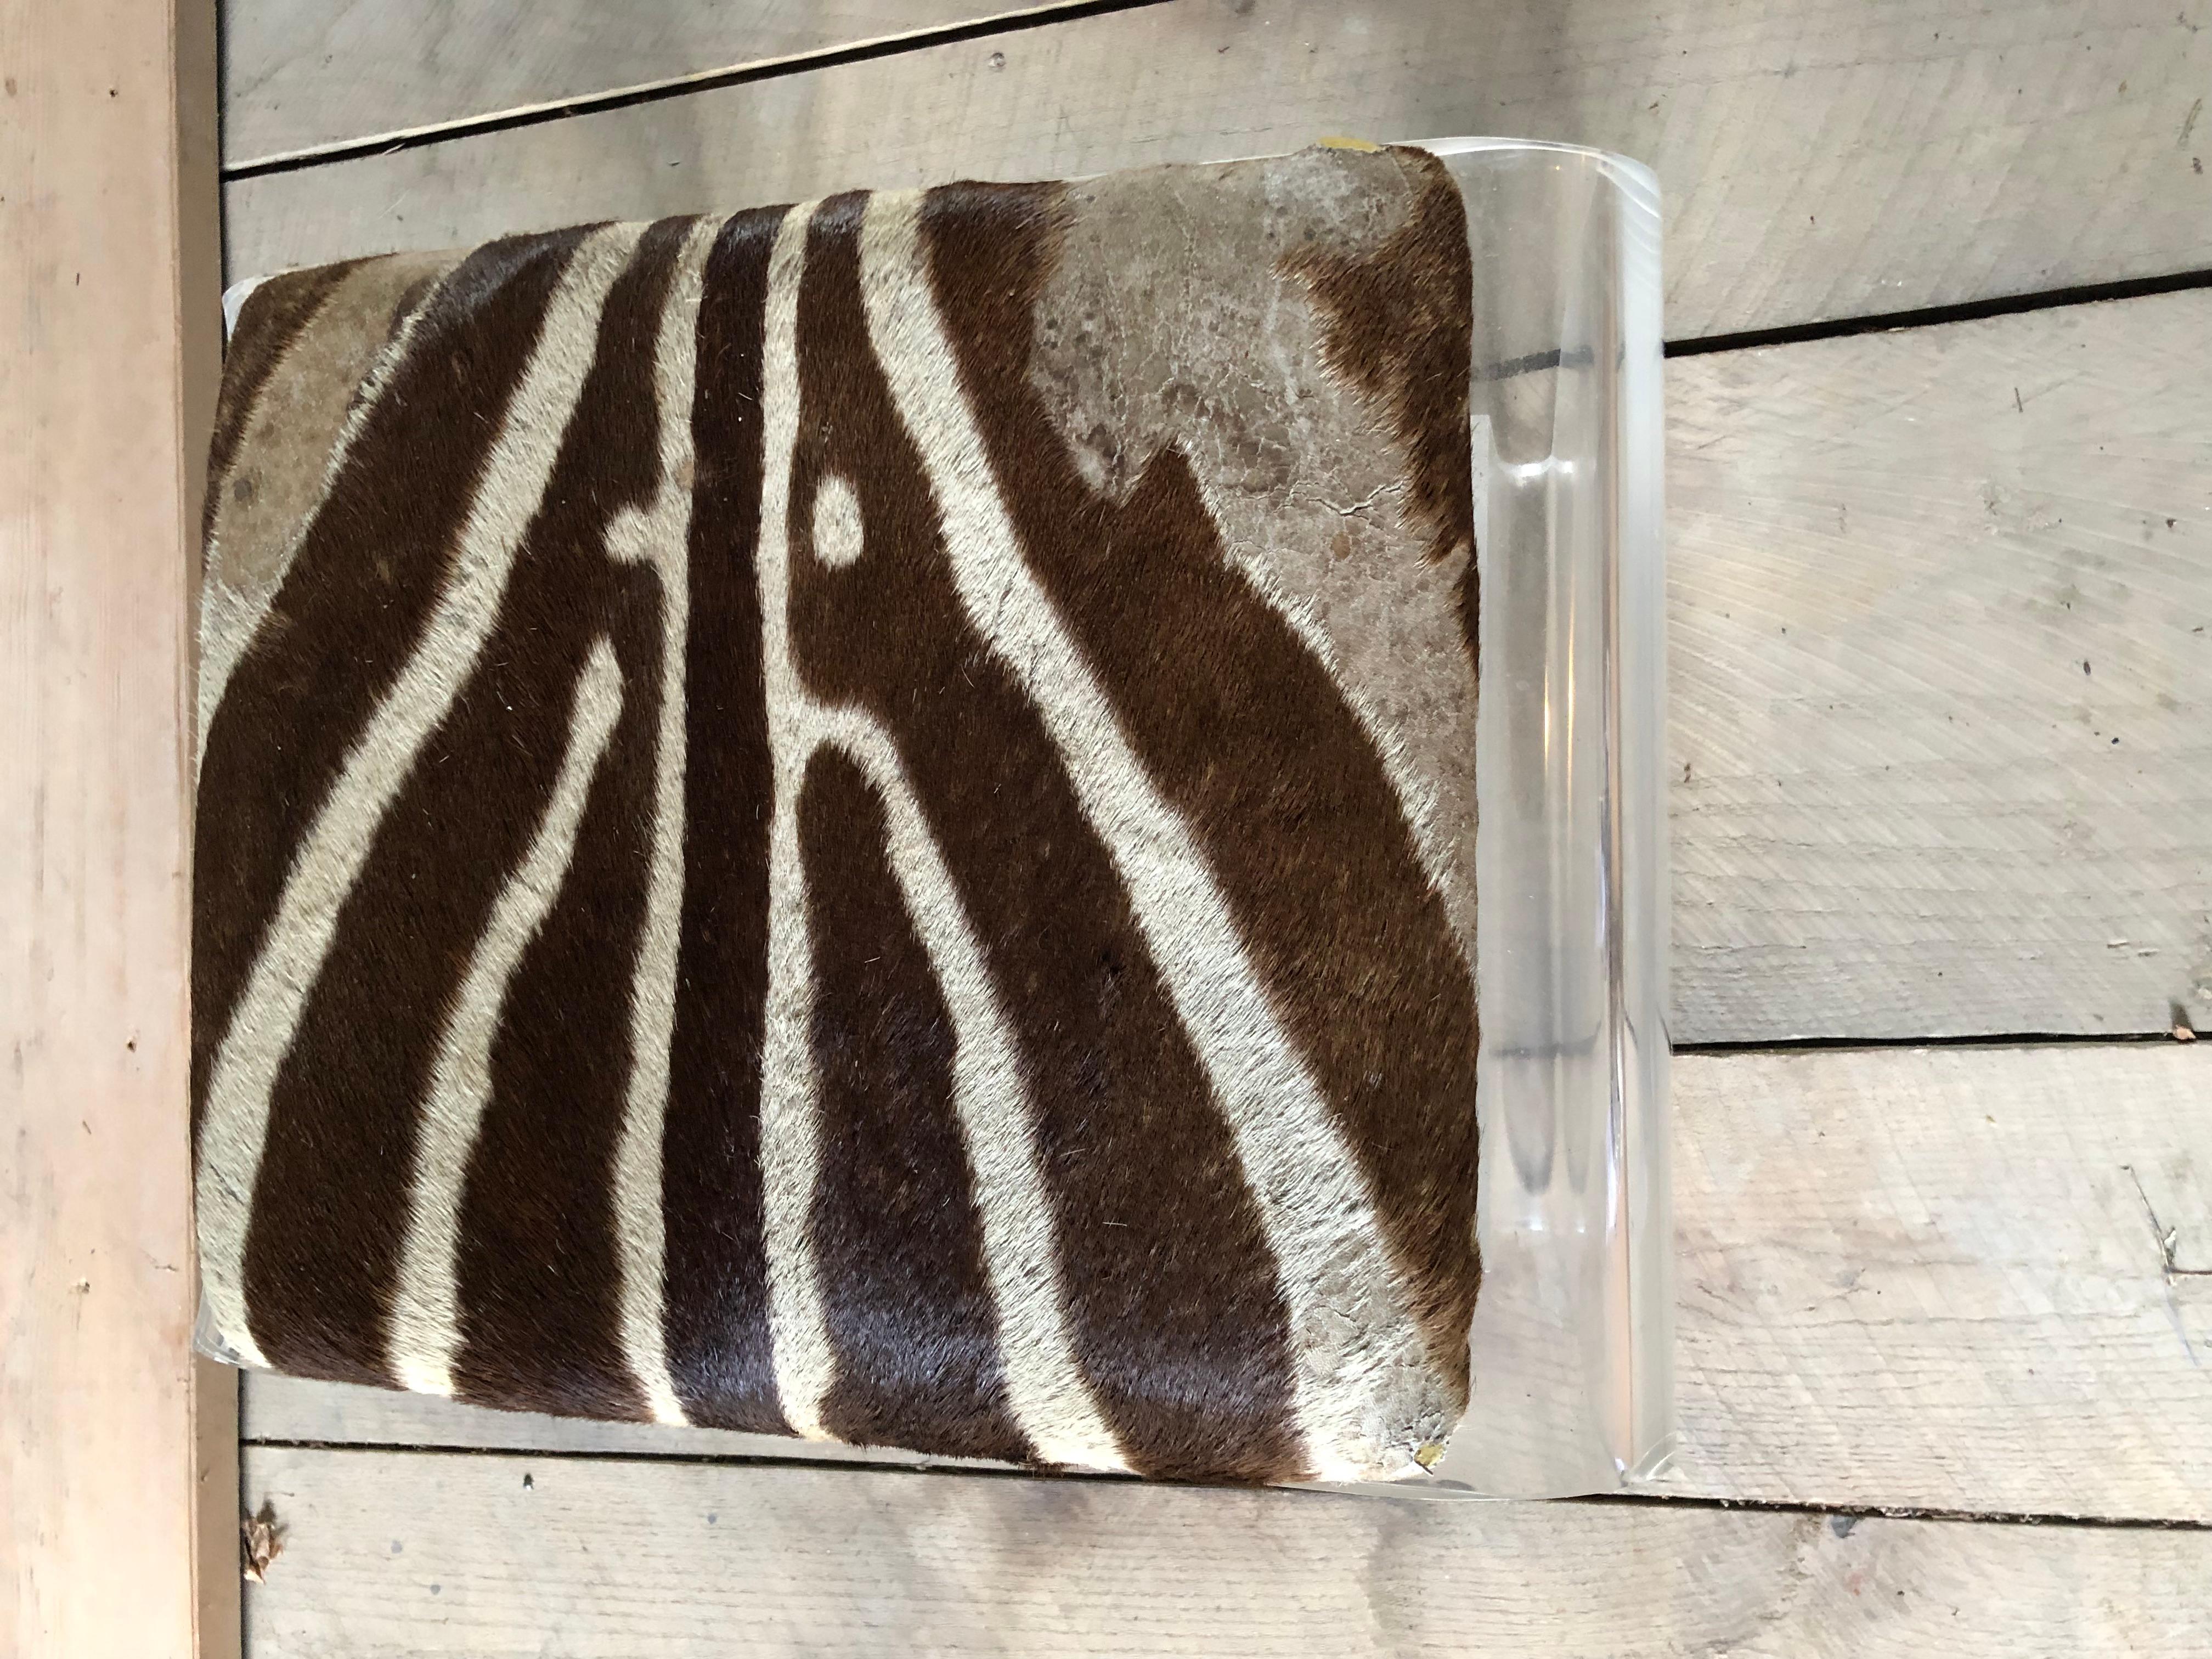 Chic waterfall style heavy lucite bench or ottoman having vintage zebra upholstered top.  Hide shows signs of wear and has one corner where interior foam is visible.